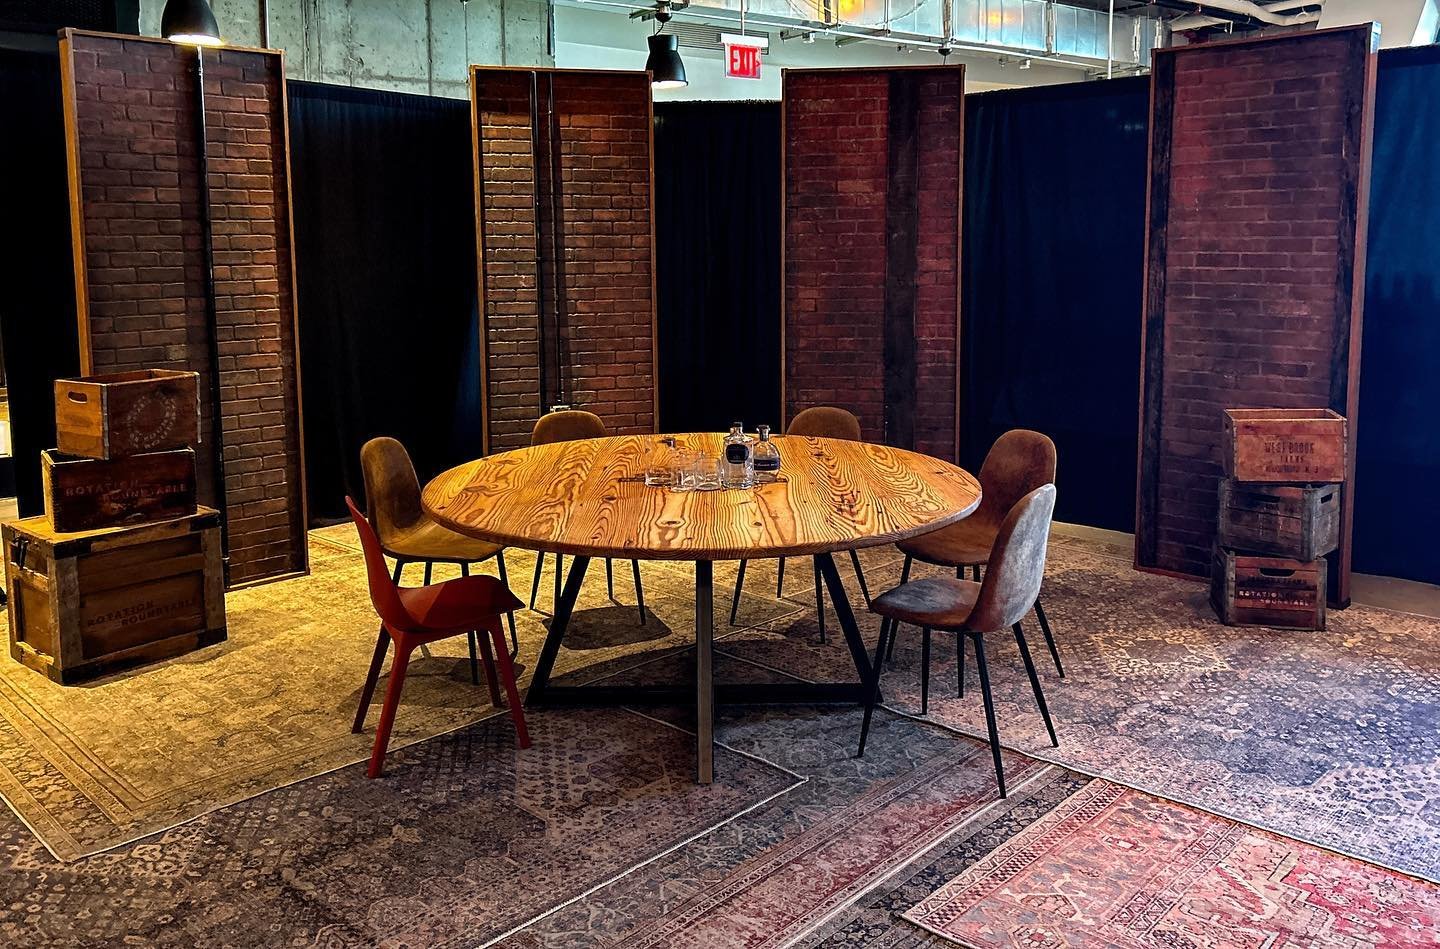 What cuts deeper: our laser or these conversations with @amazonmusic 🤔 For the special series, we designed and built the set complete with a custom round table made of reclaimed pine and finished with a laser etched logo 🖊️ 

#setsandeffects #sets 